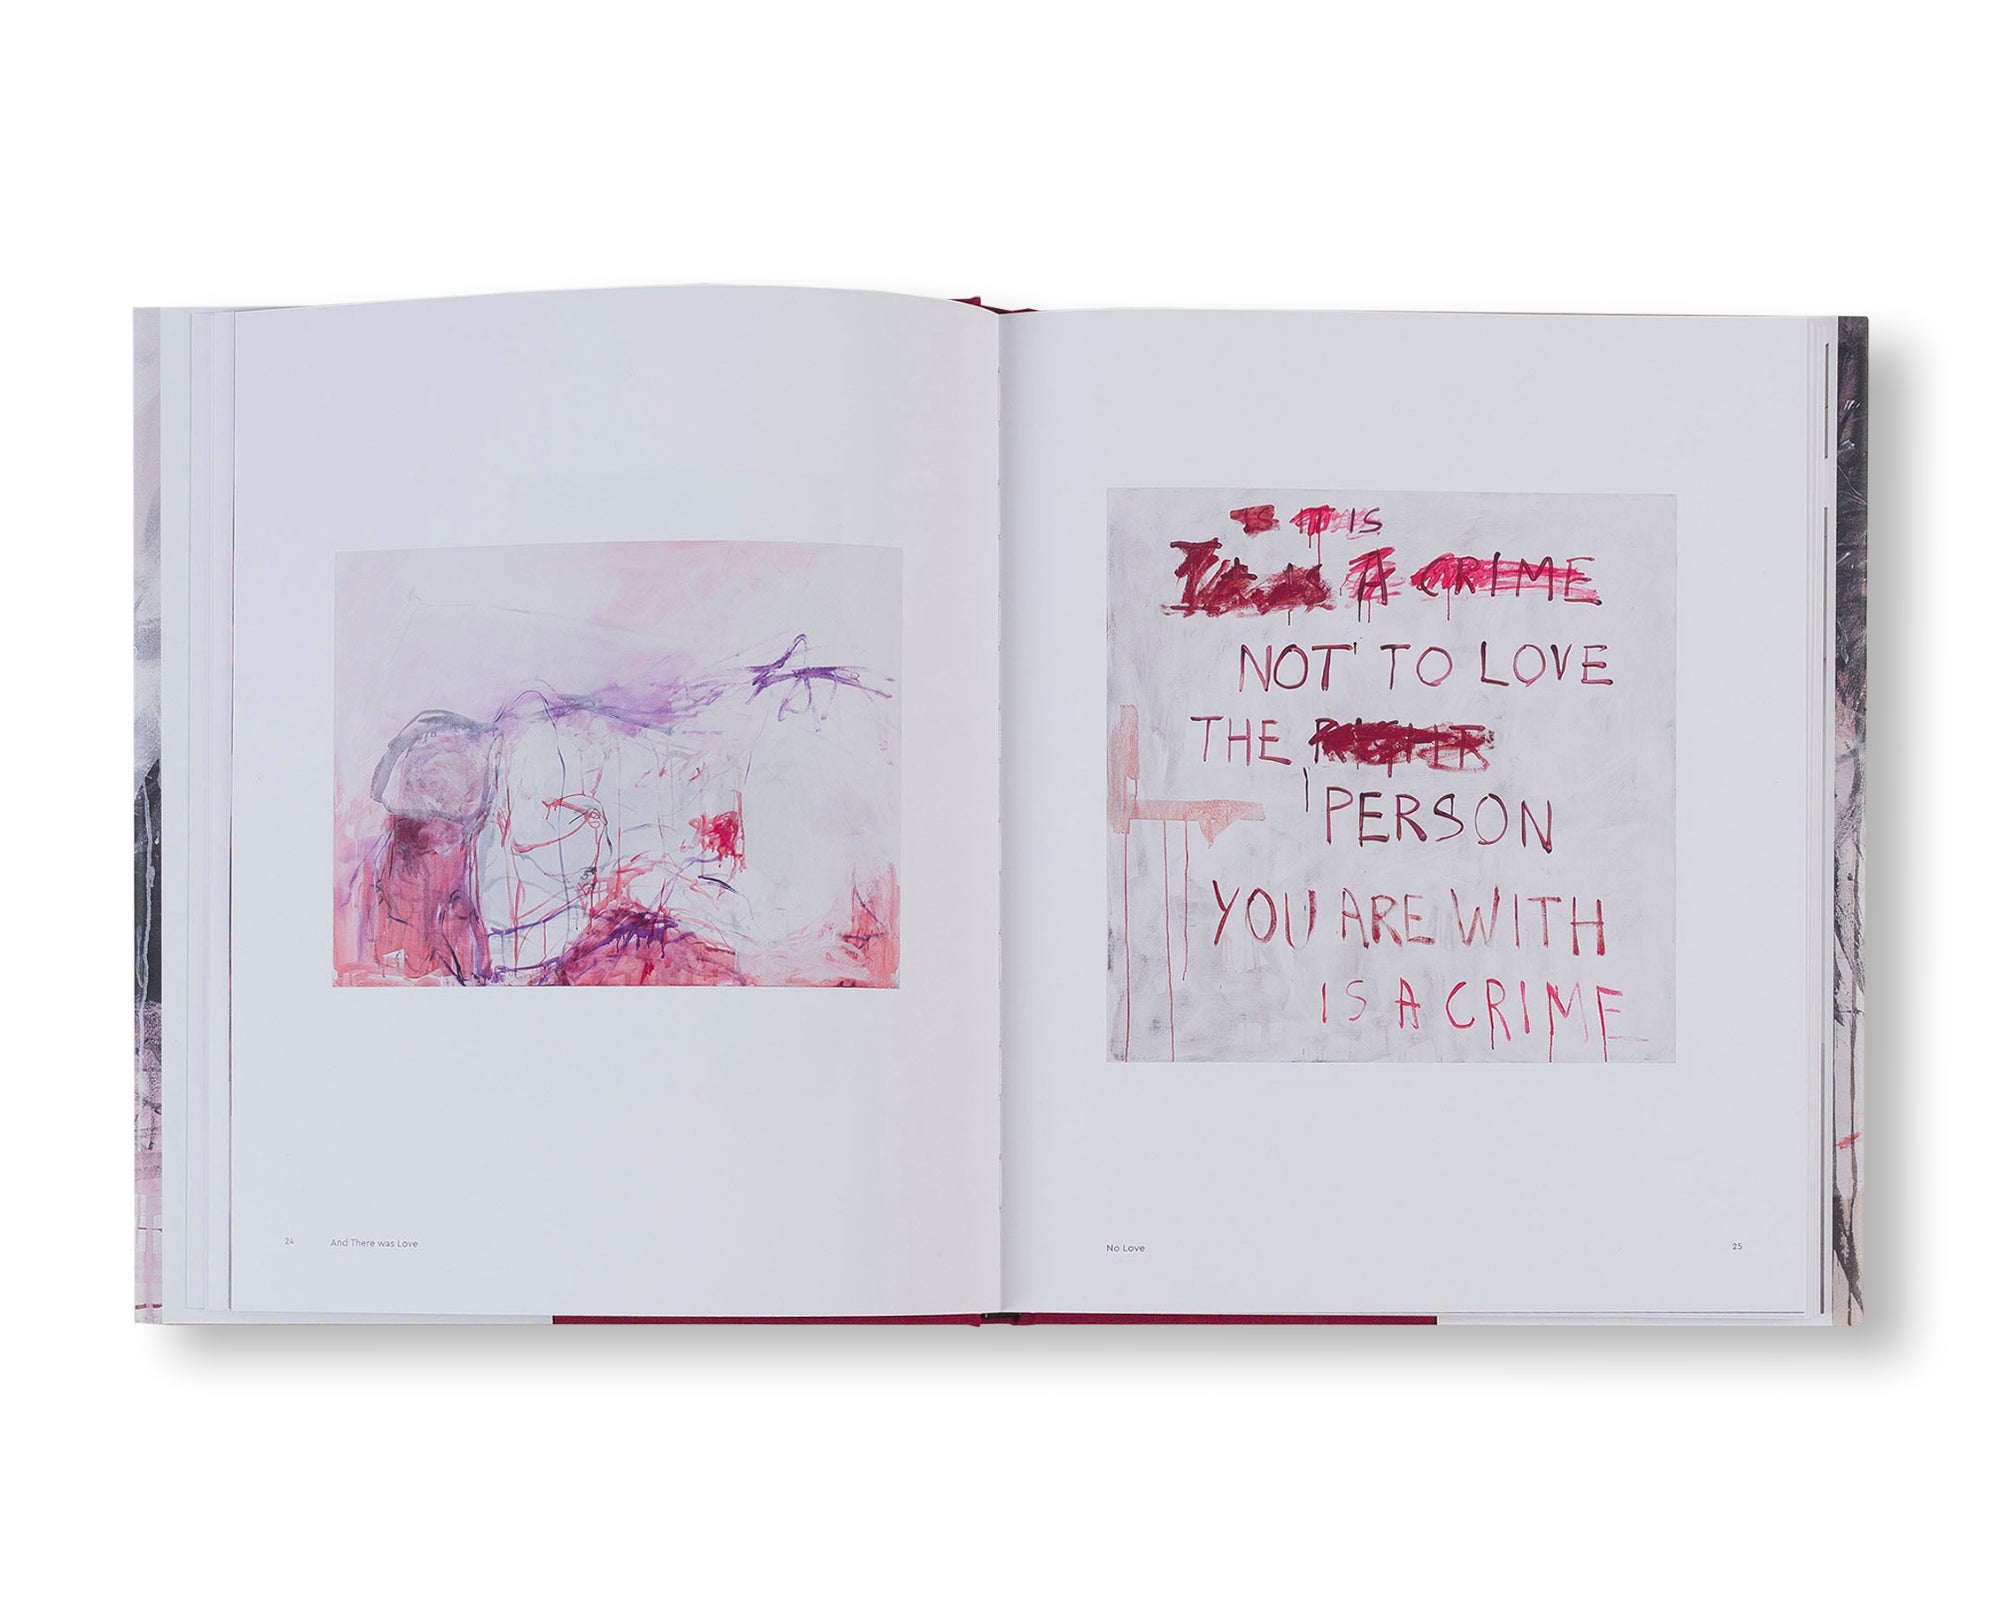 A FORTNIGHT OF TEARS by Tracey Emin